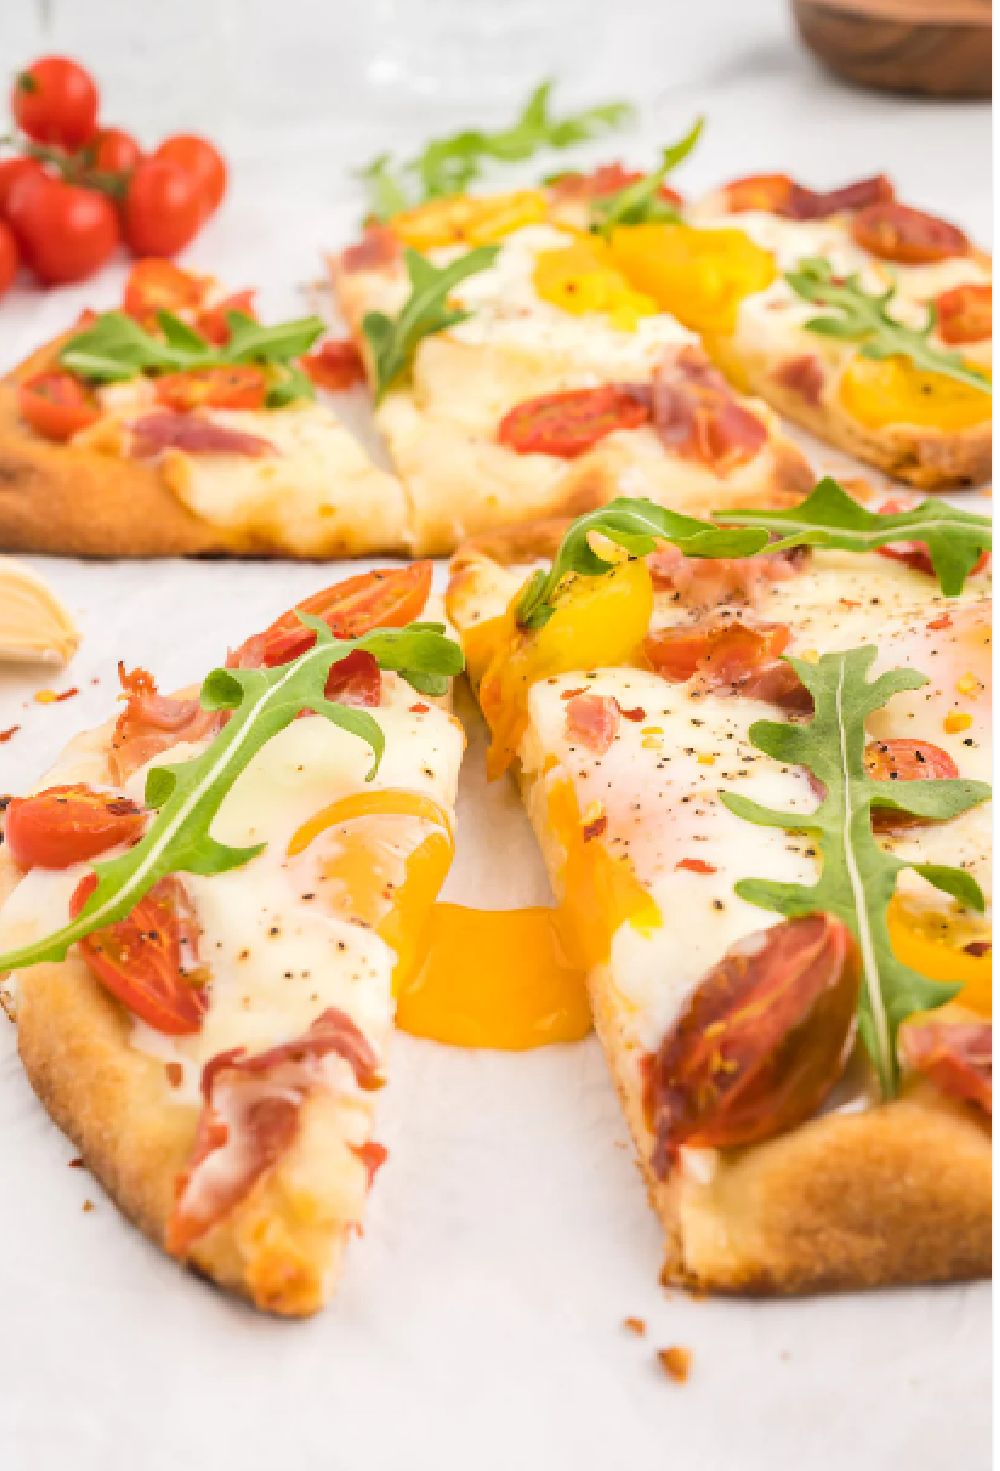 Flatbread Breakfast Pizza with a sunny side up egg and arugula